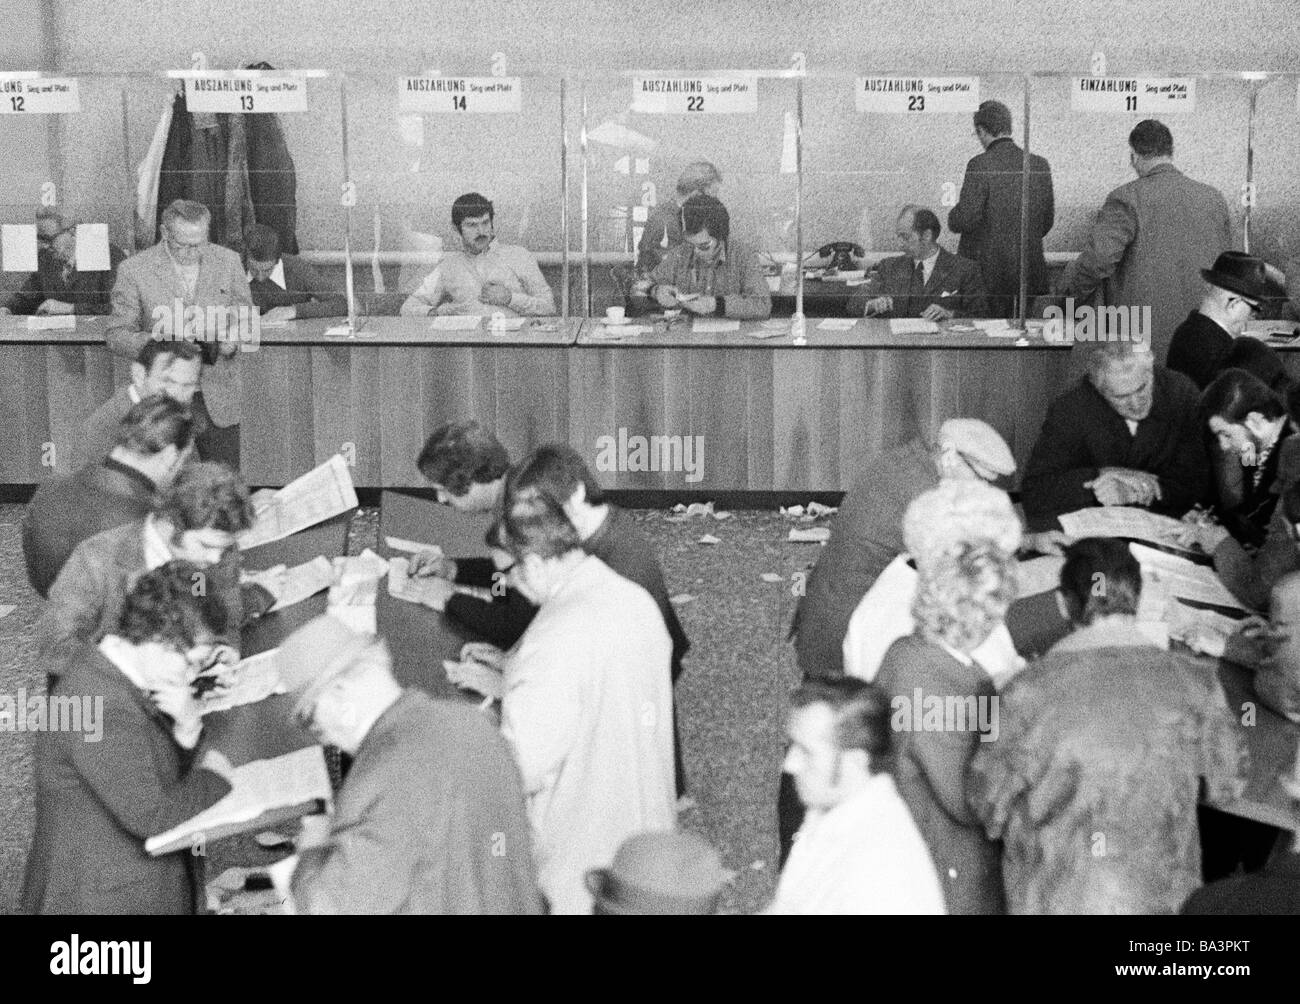 Seventies, black and white photo, sports, equestrianism, racecourse Dinslaken, trotting race 1973, horse-racing bet, bet counters, men and women read the racing sheet, D-Dinslaken, Lower Rhine, Ruhr area, North Rhine-Westphalia Stock Photo